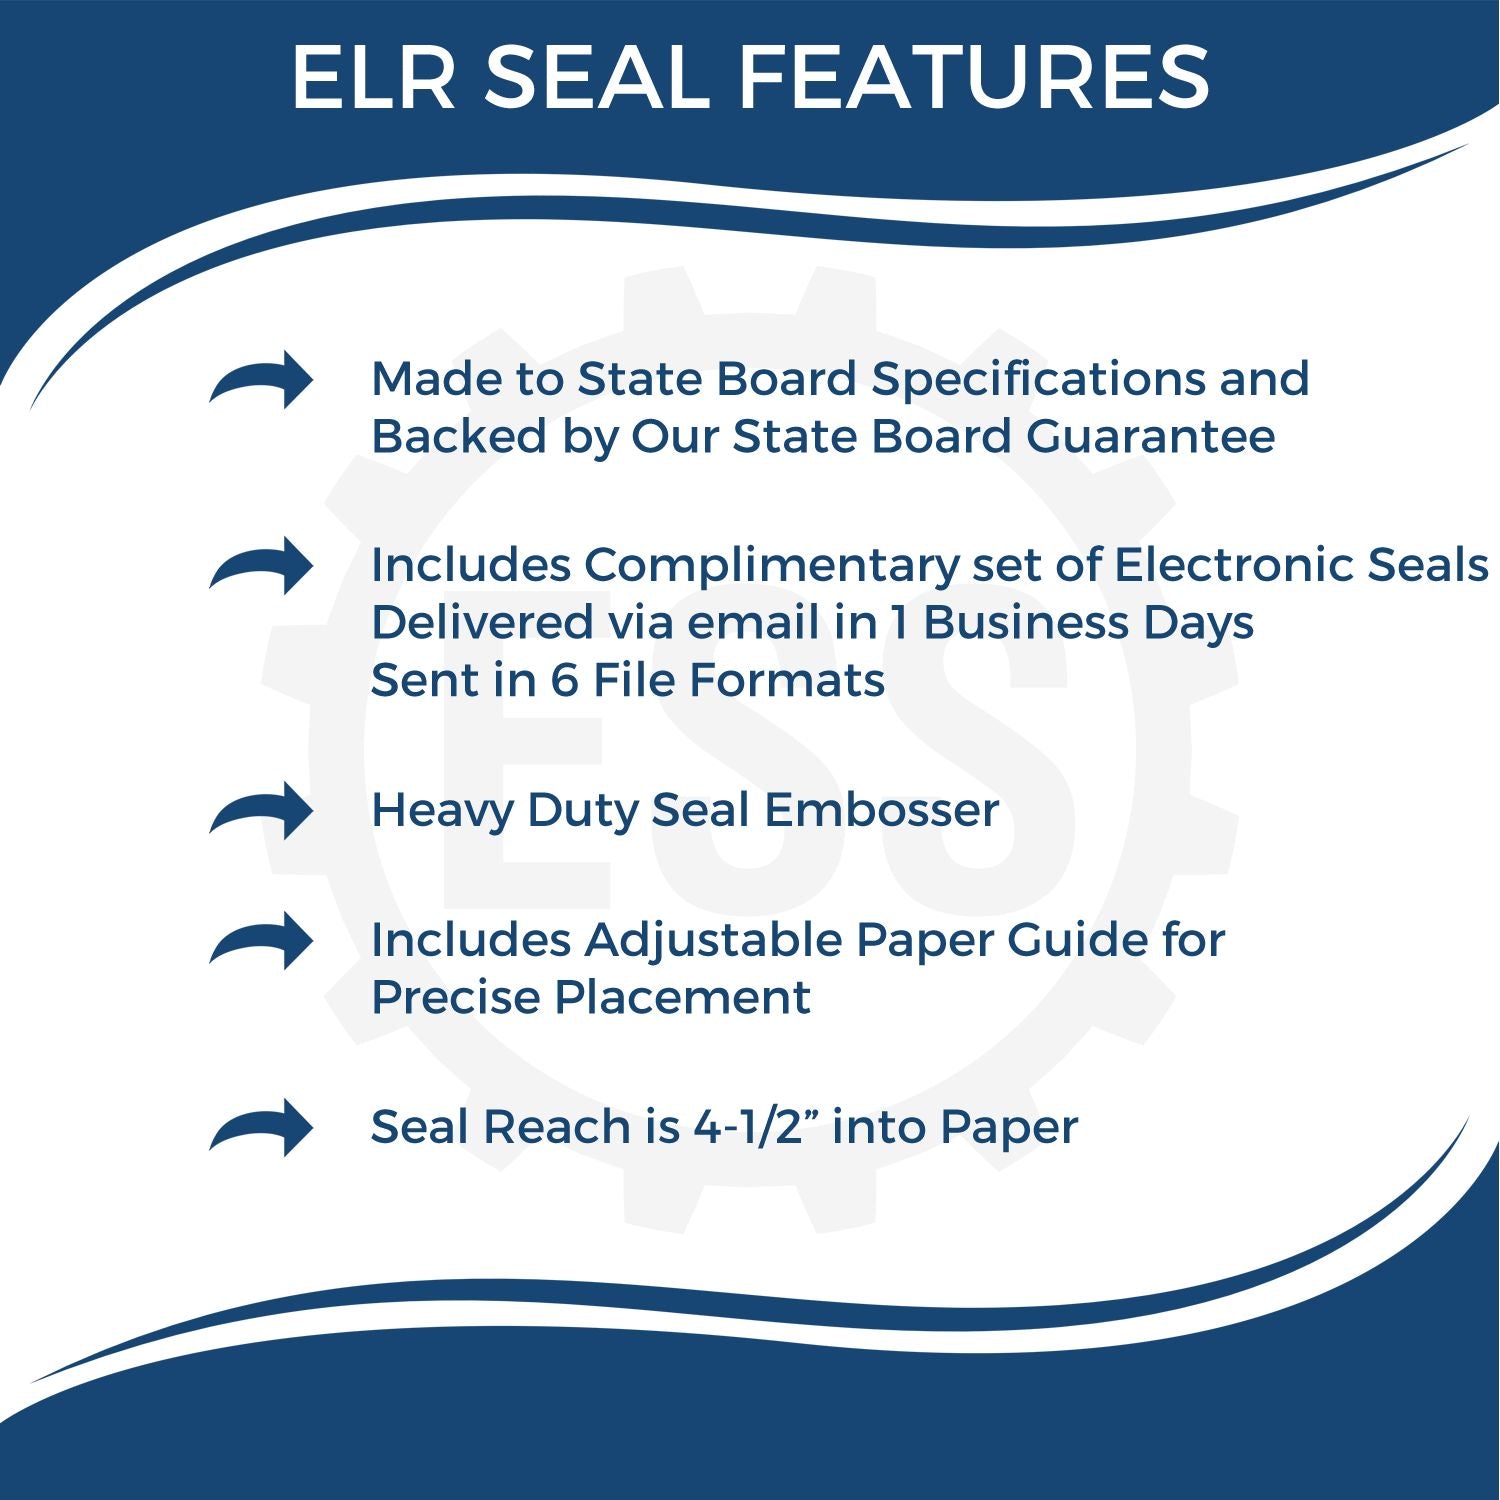 The main image for the State of Florida Extended Long Reach Engineer Seal depicting a sample of the imprint and electronic files